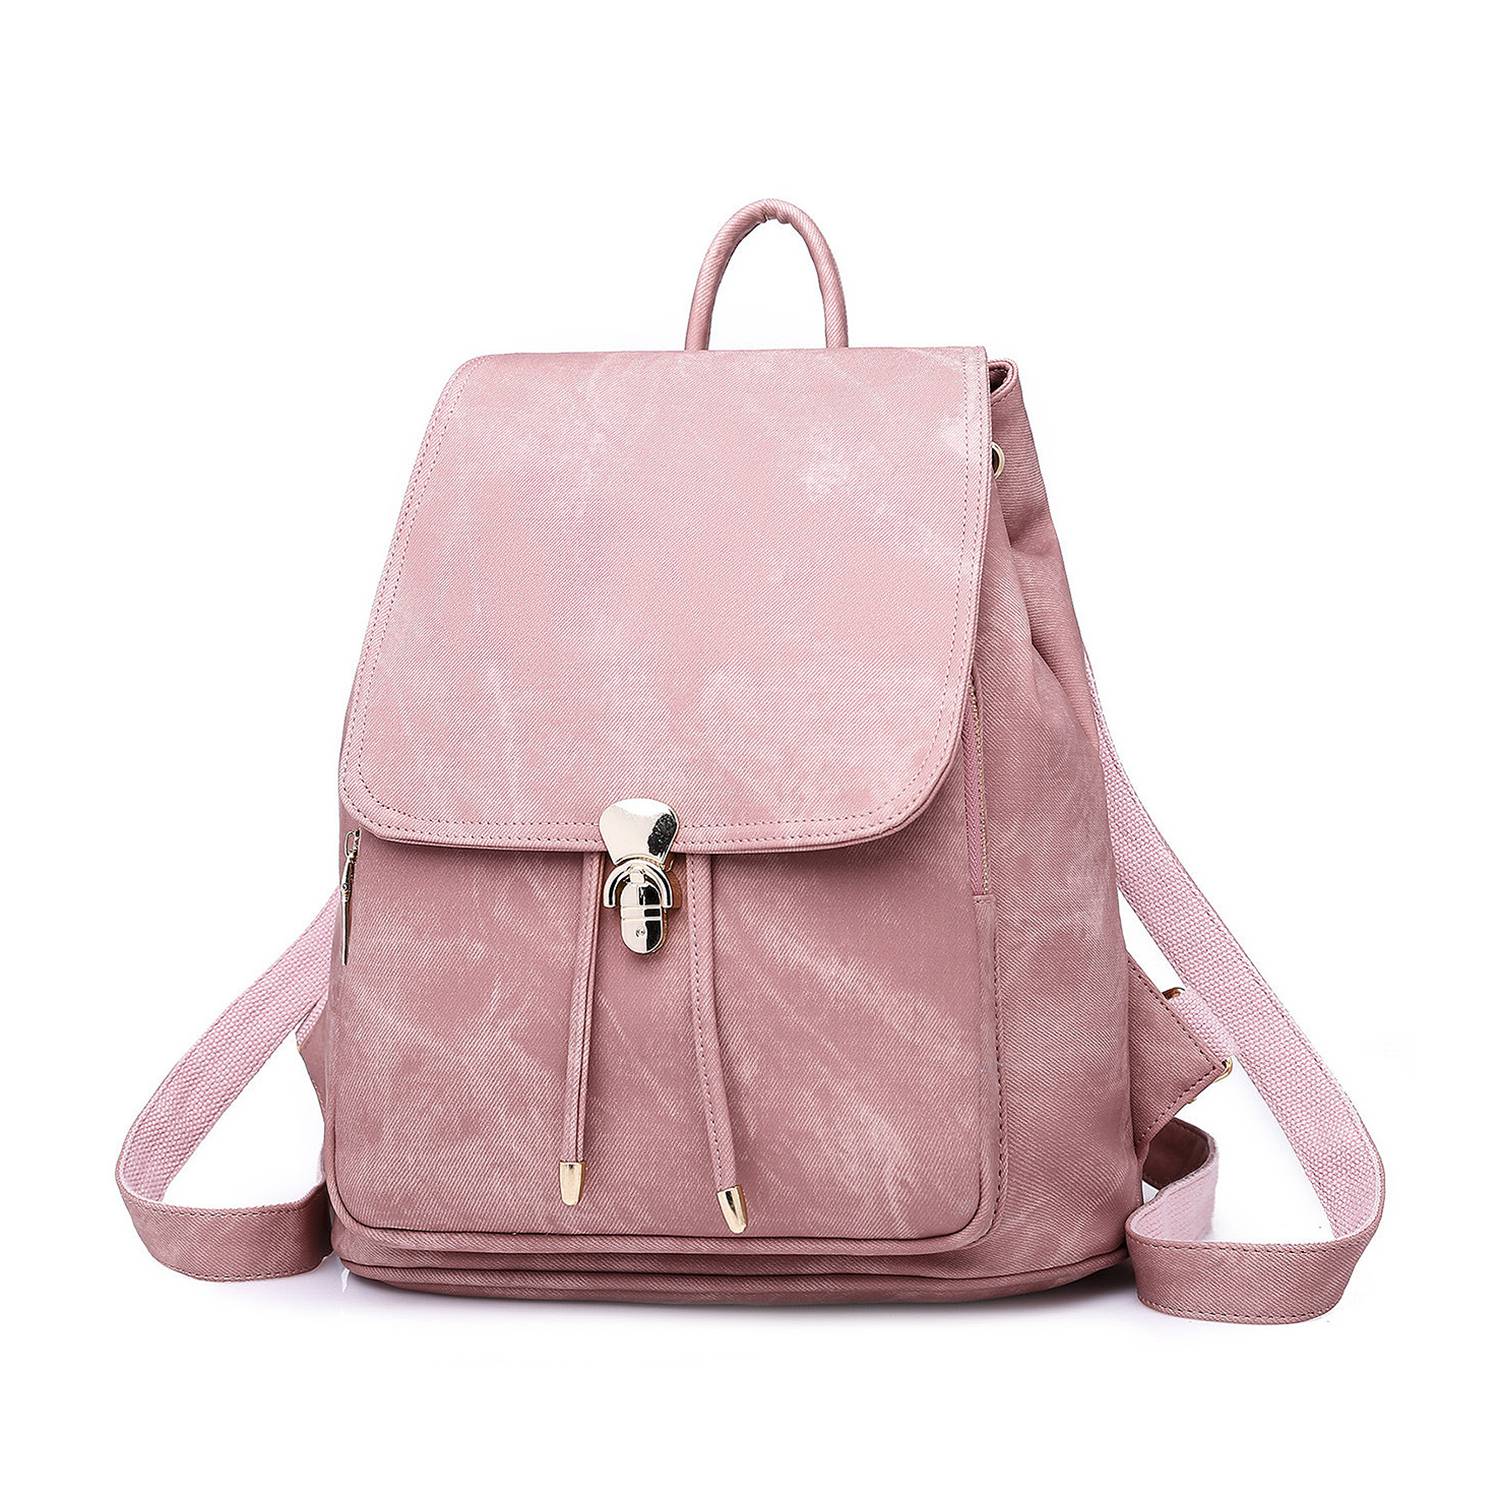 2 Pieces / Set Of Ladies Backpack Pu Leather Female Backpack Casual Girl School Backpack Travel Beam Pocket - ebowsos